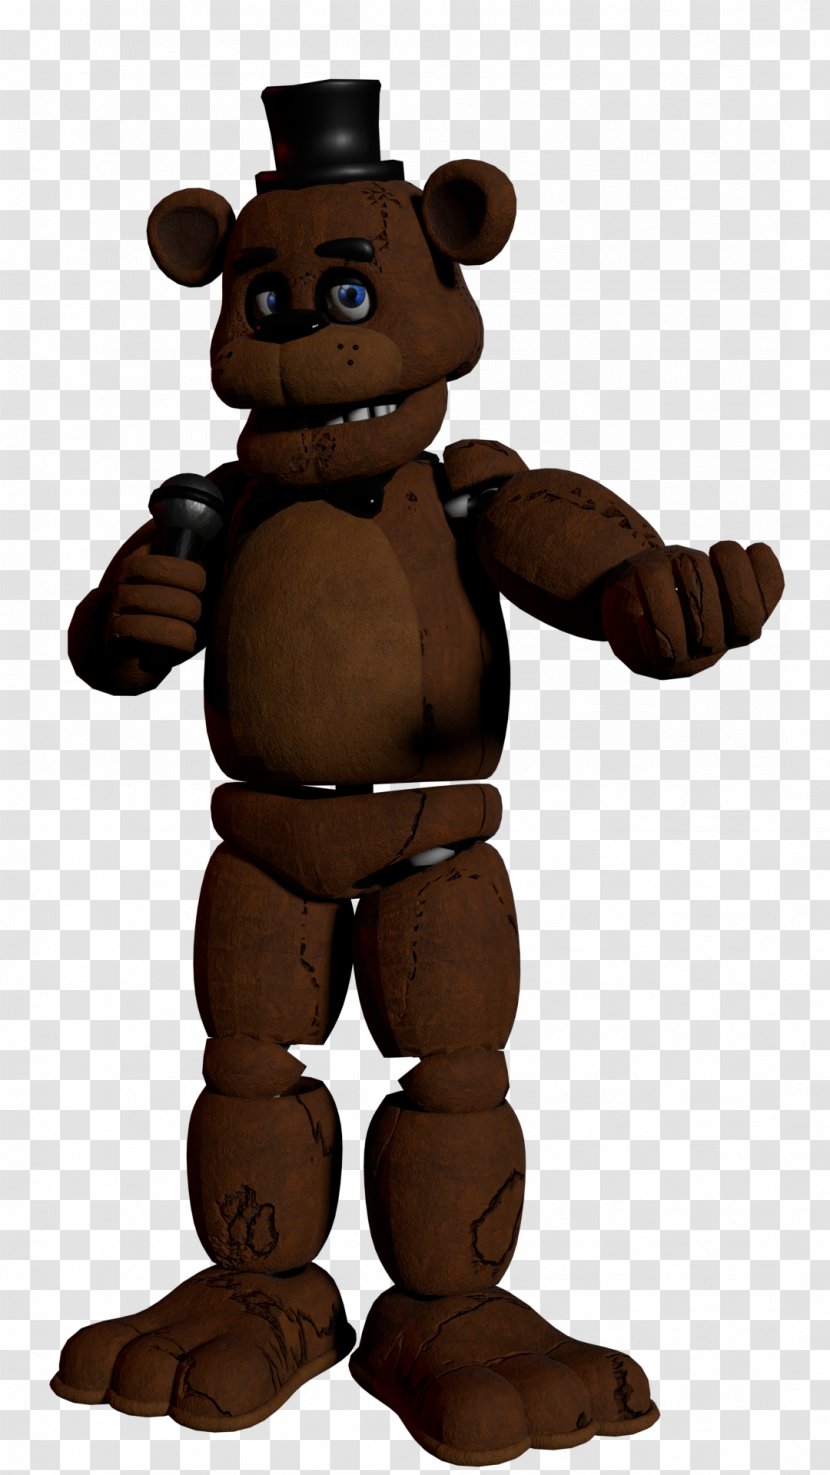 Five Nights At Freddy's: Sister Location Rendering Texture Mapping Animation - Tree - Relaxation Transparent PNG